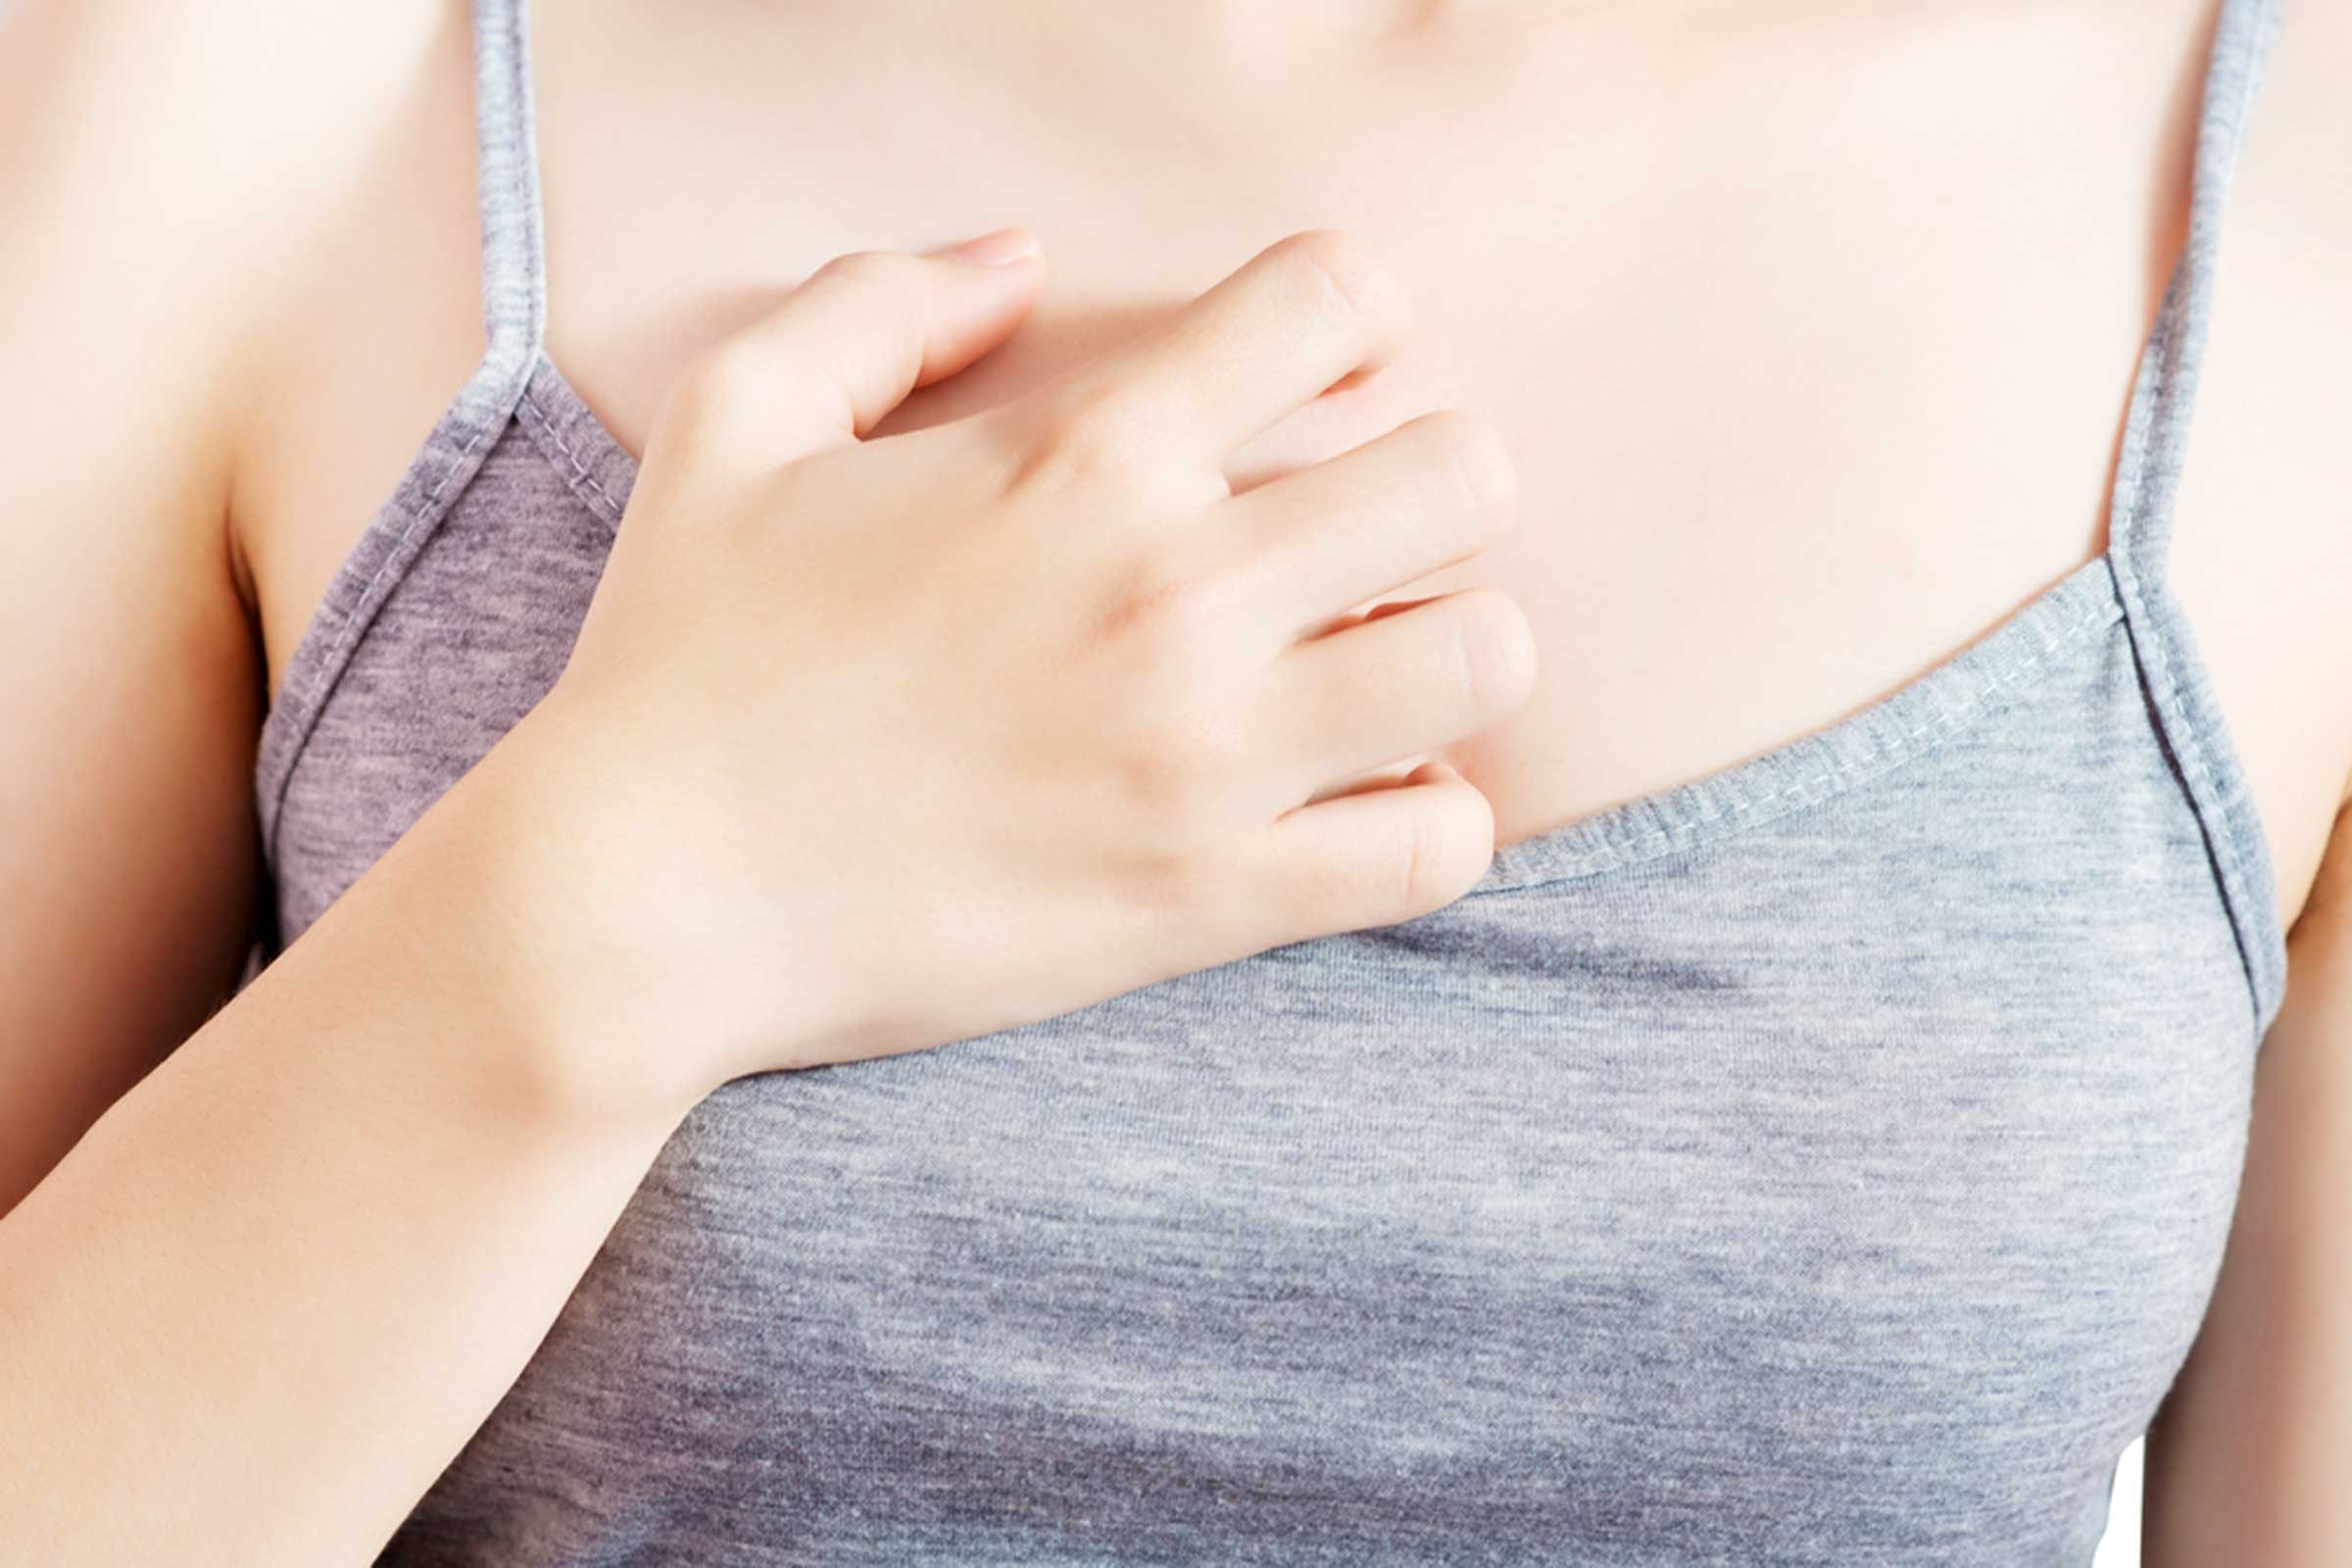 Rash under breasts may be completely benign or signify serious